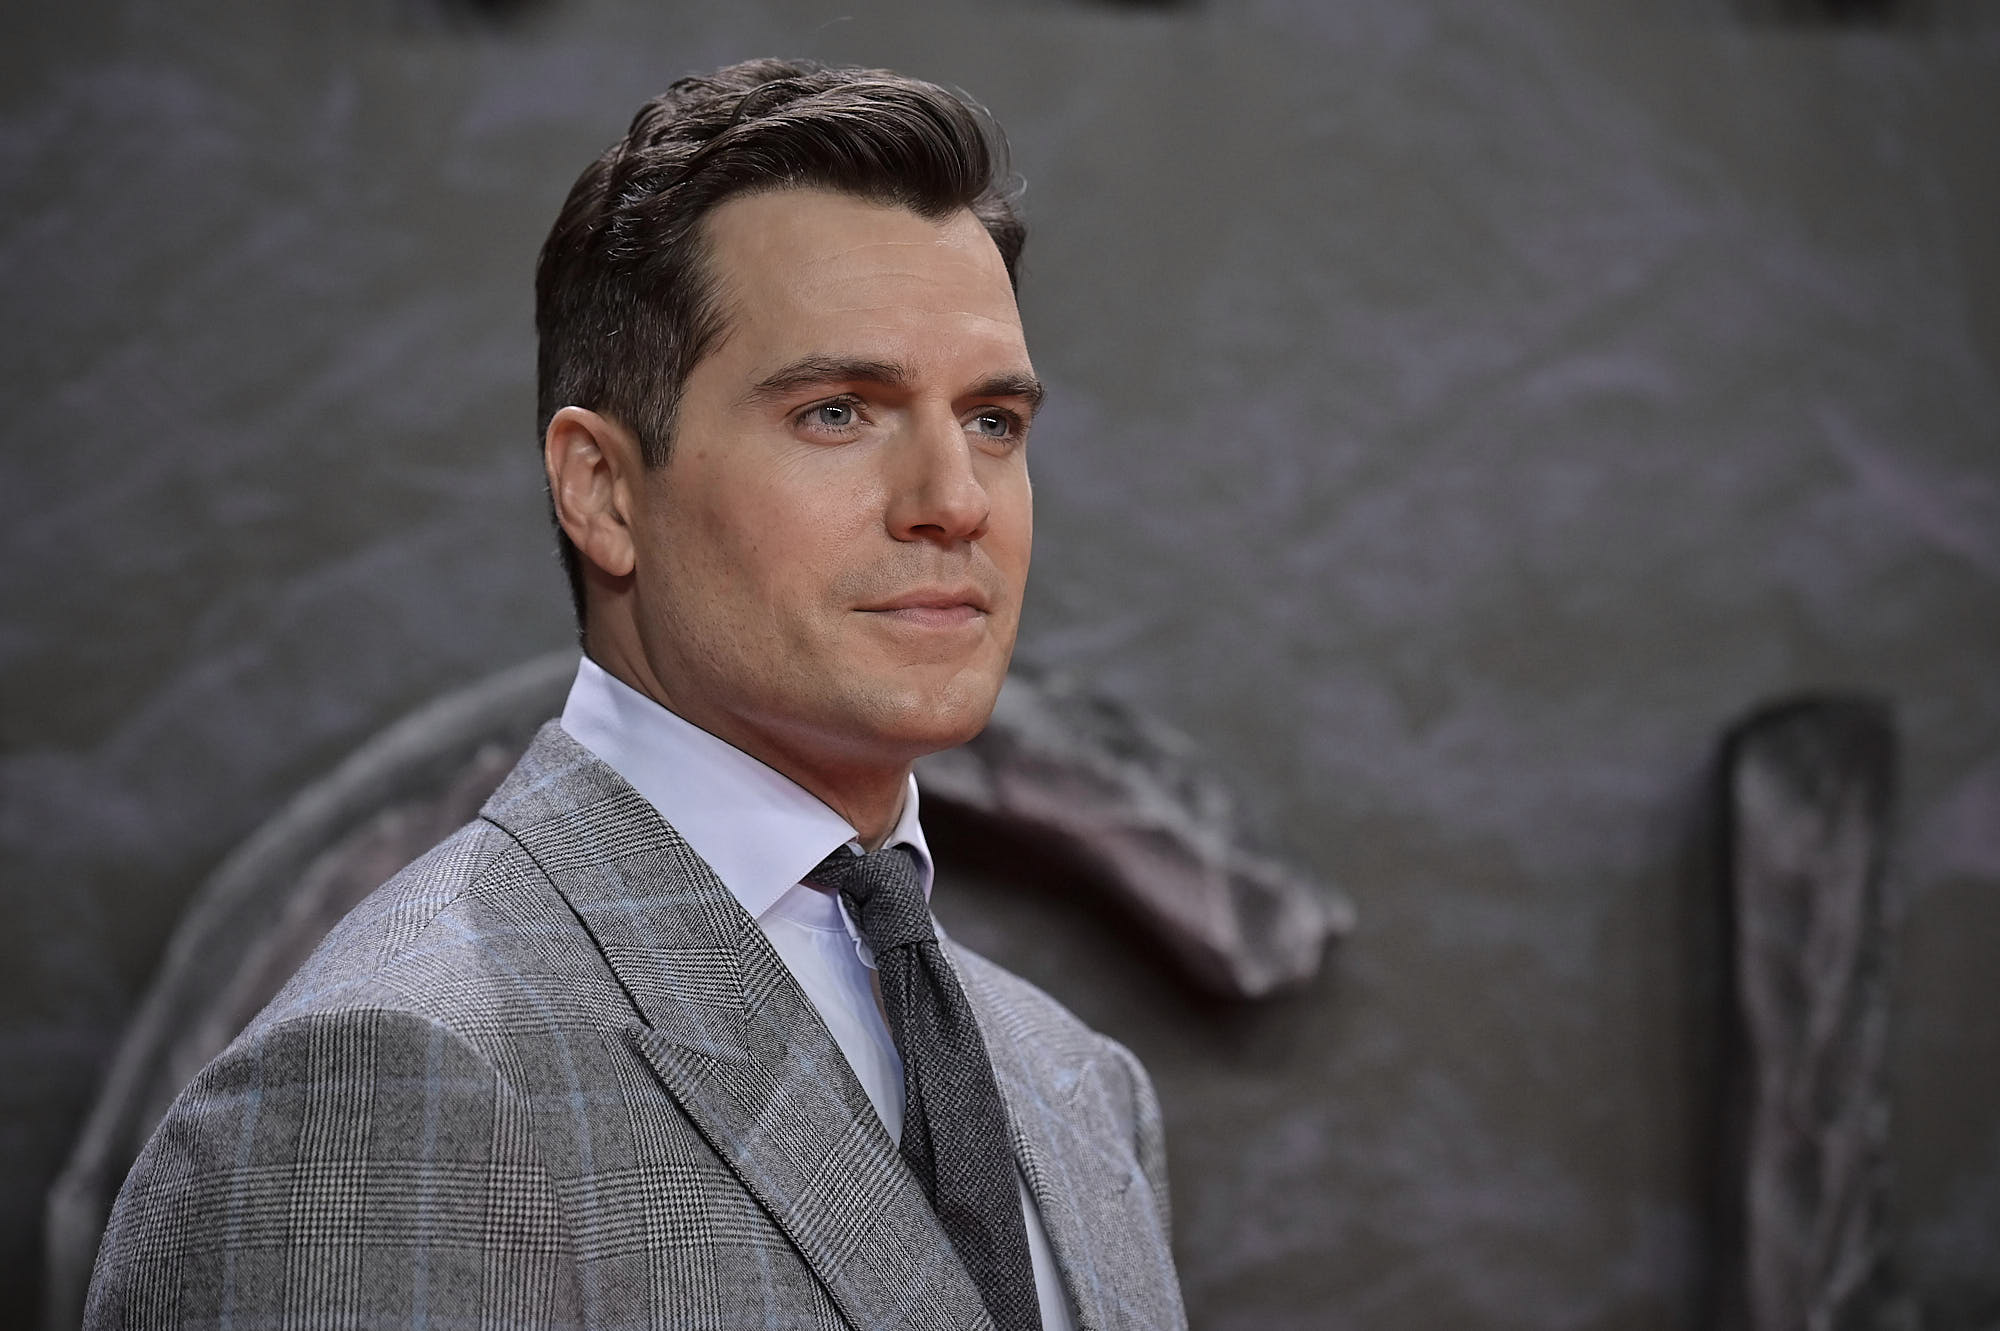 Henry Cavill won't return to The Witcher despite losing Superman